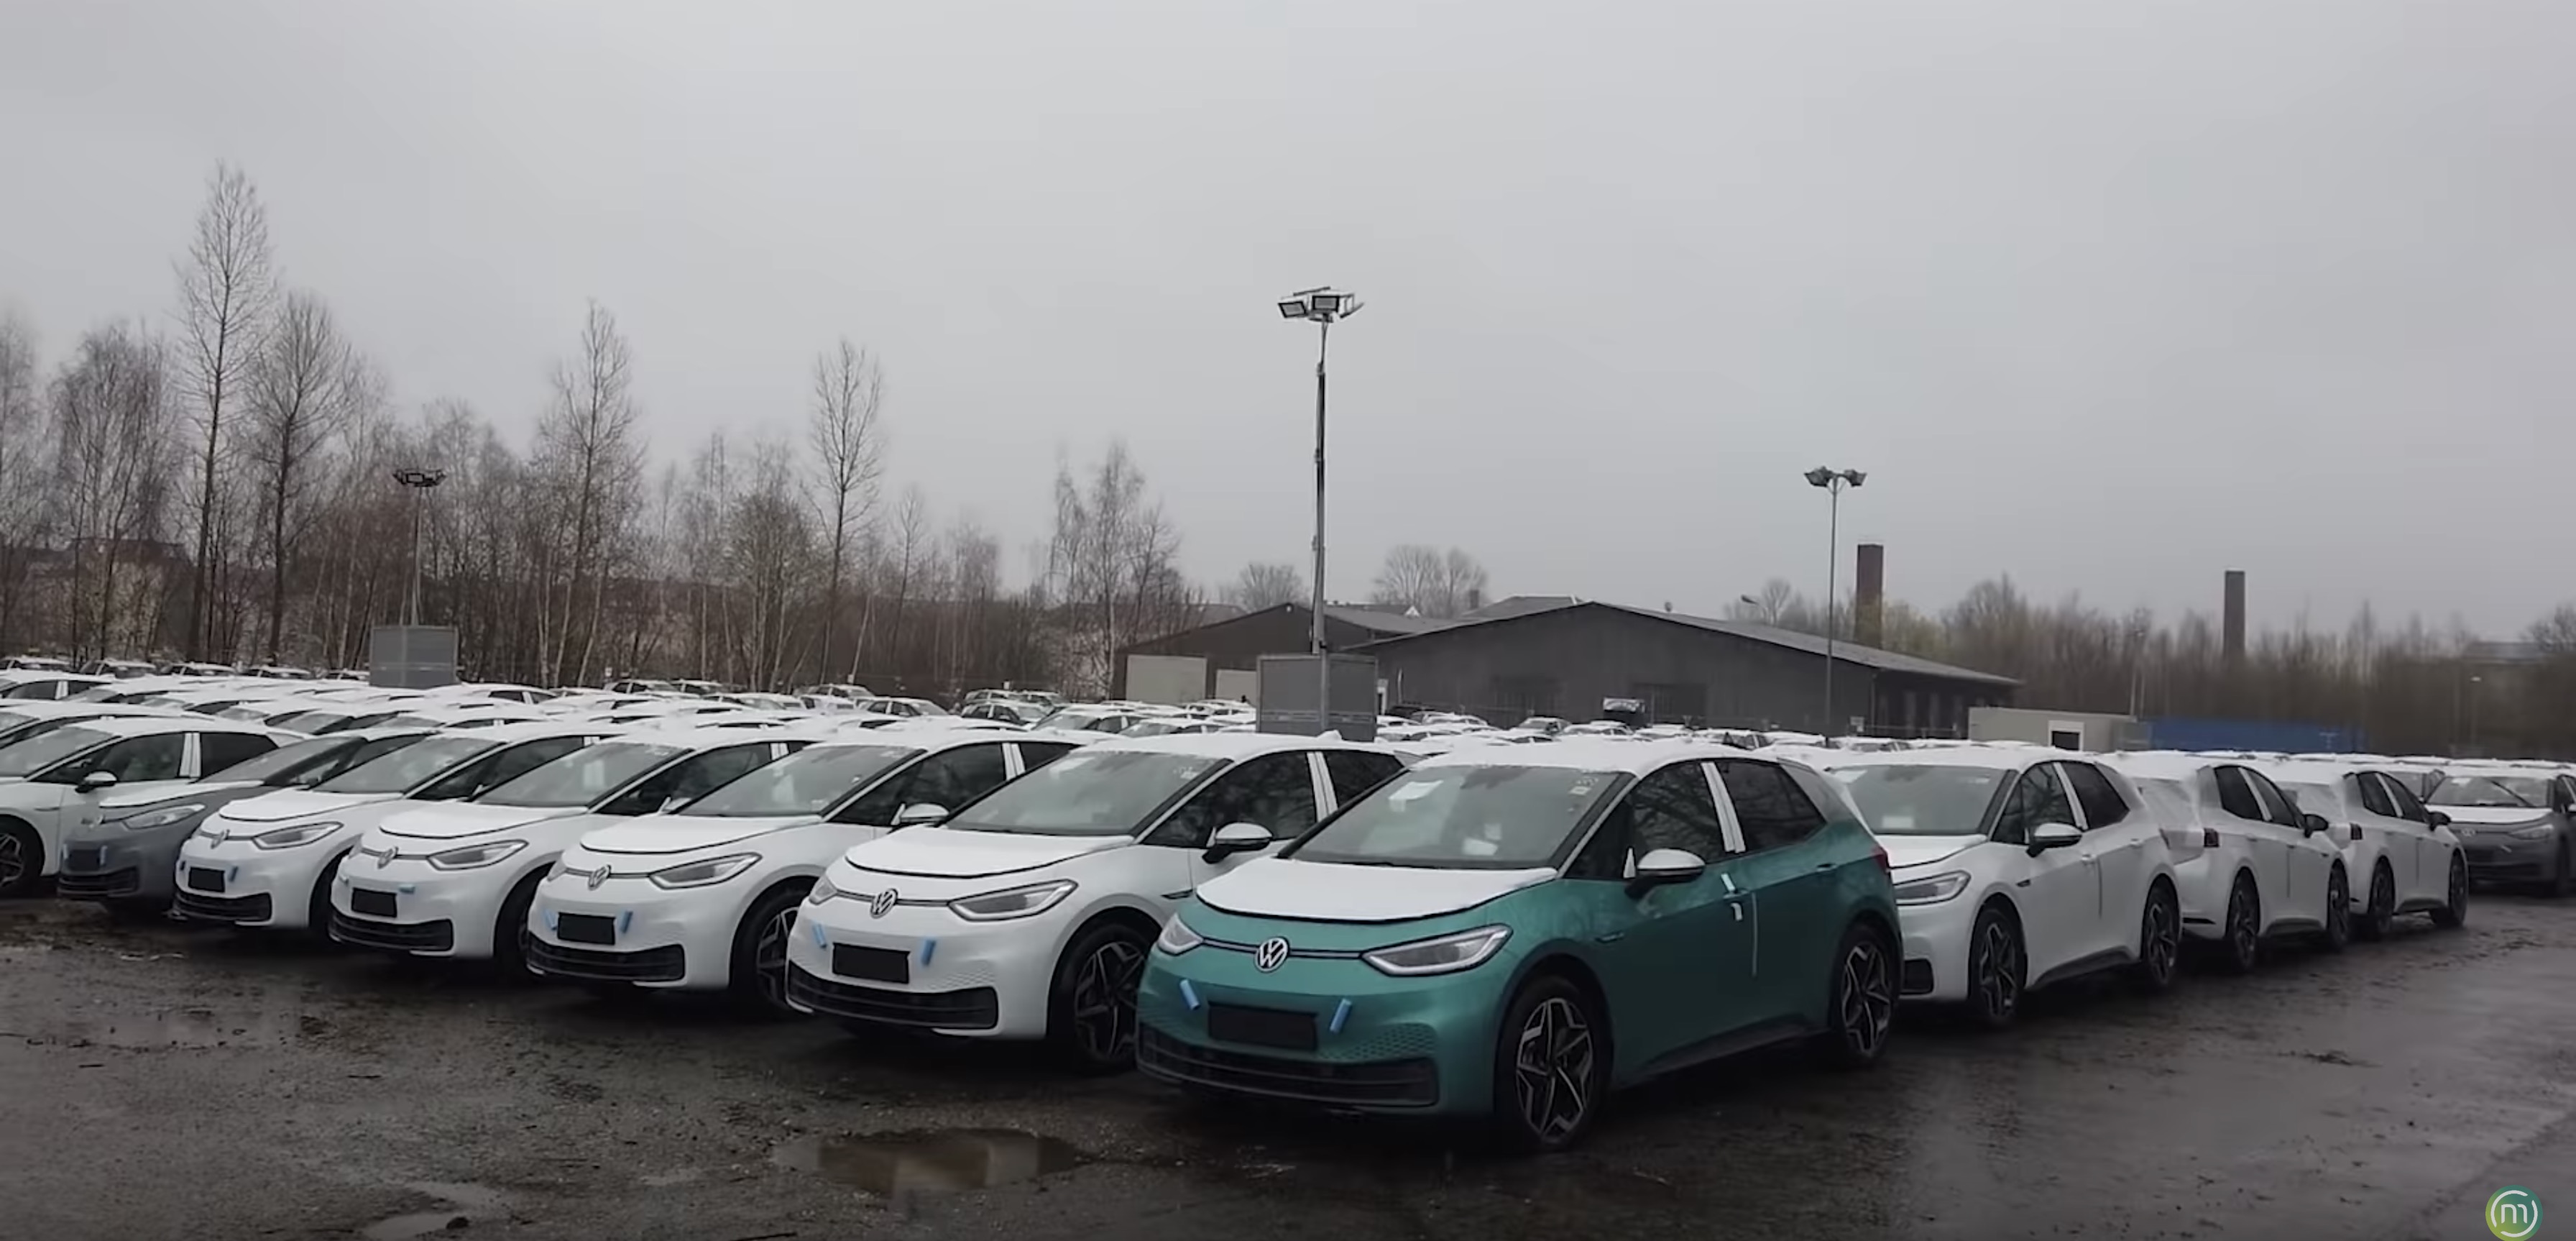 VW ID.3 thousands of electric cars spotted being stockpiled in Germany